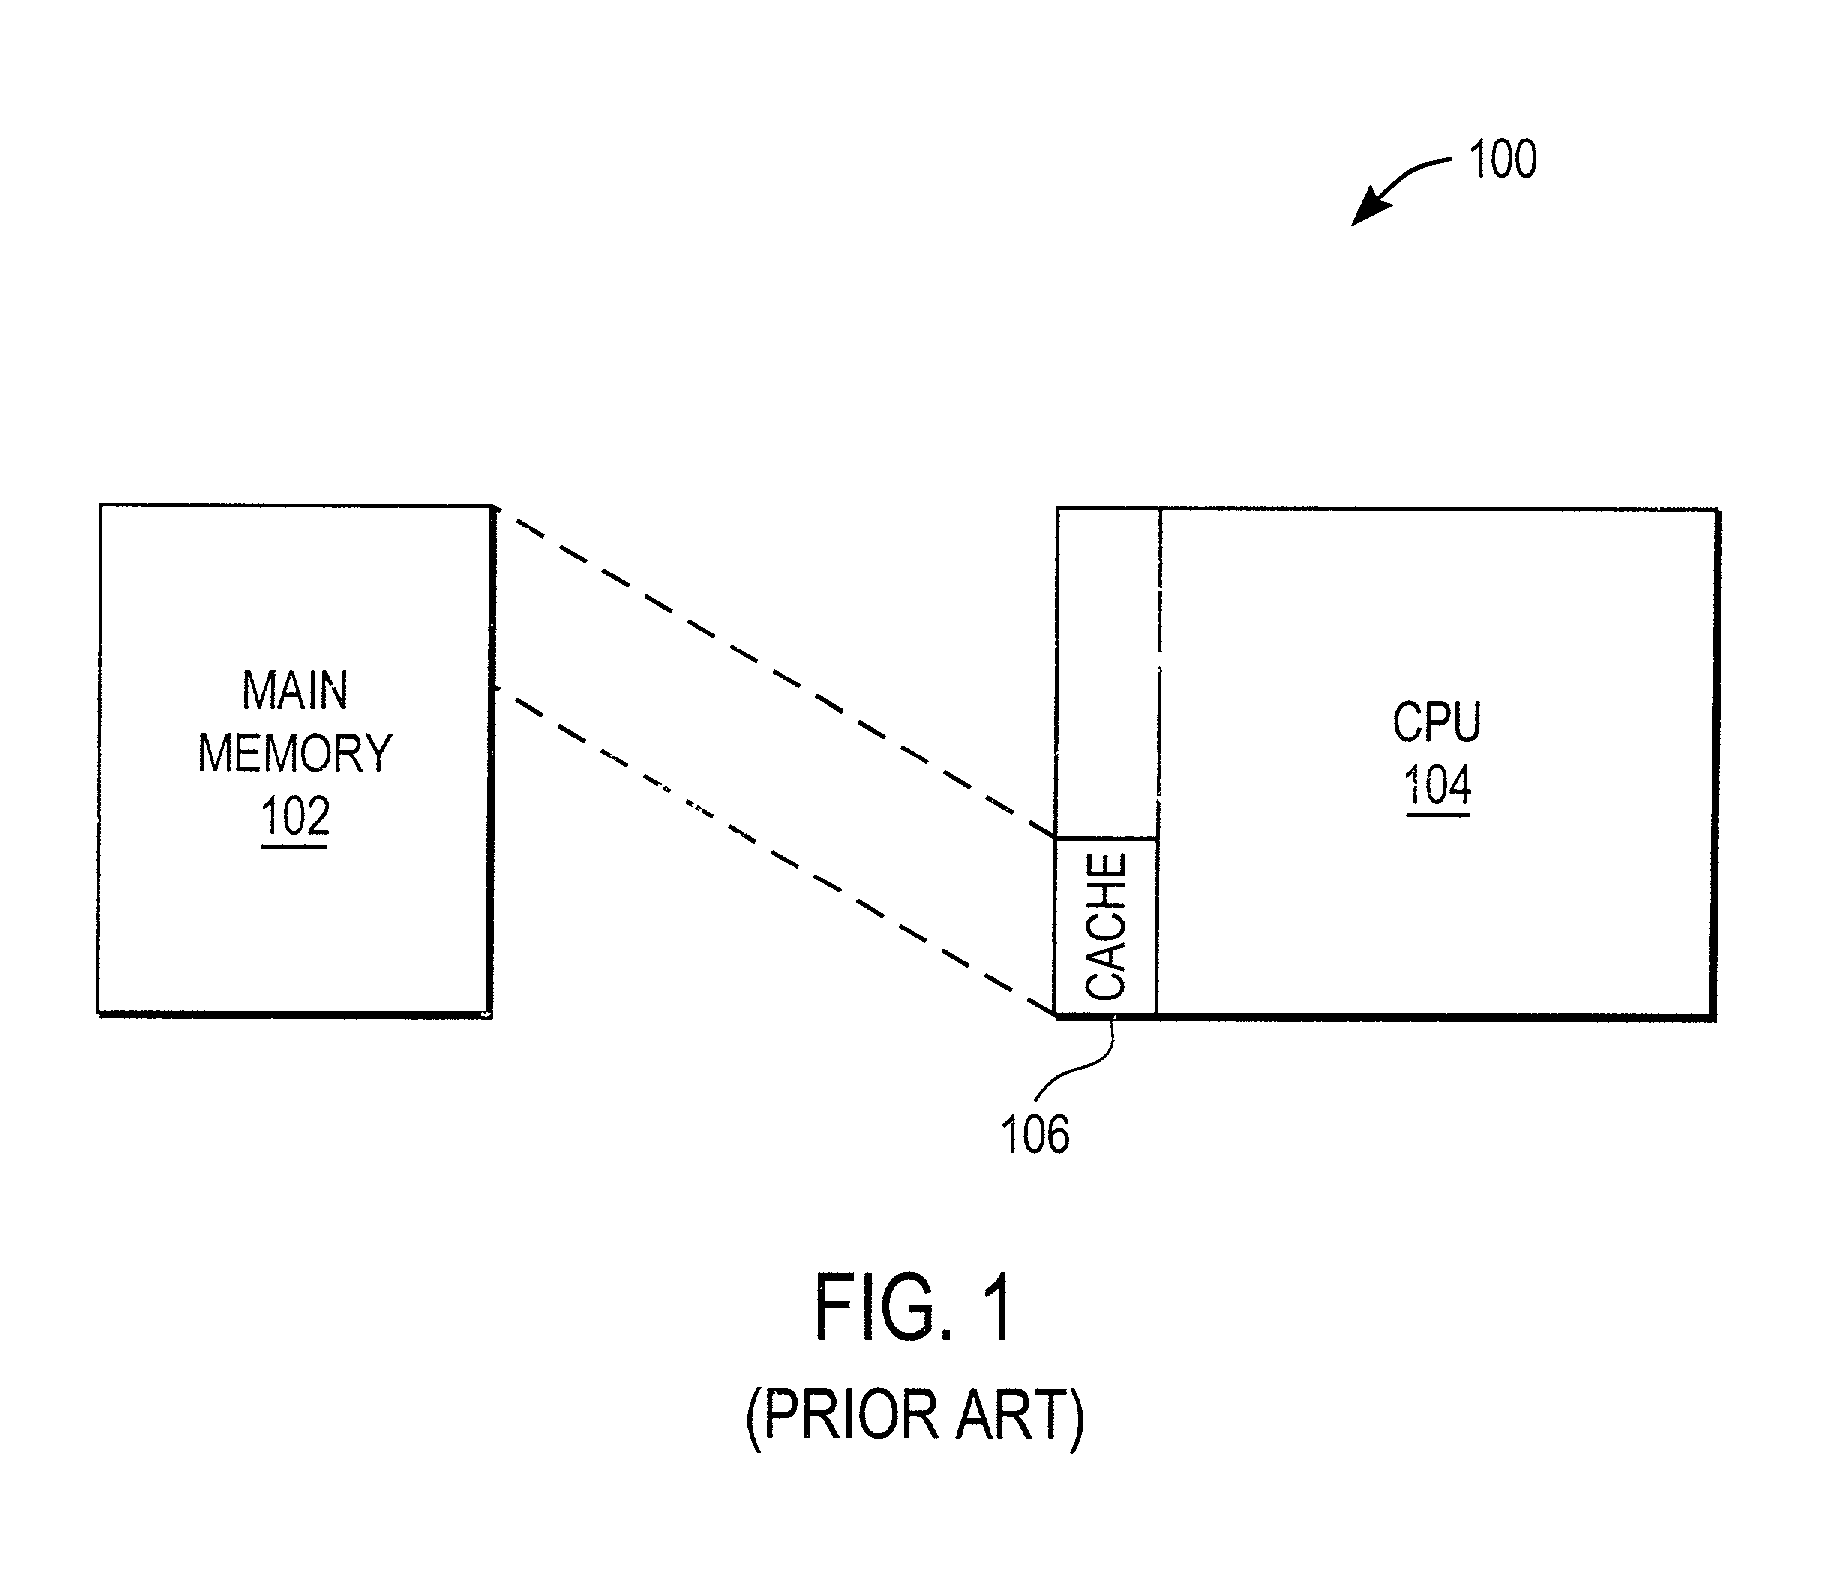 Method for reducing cache conflict misses